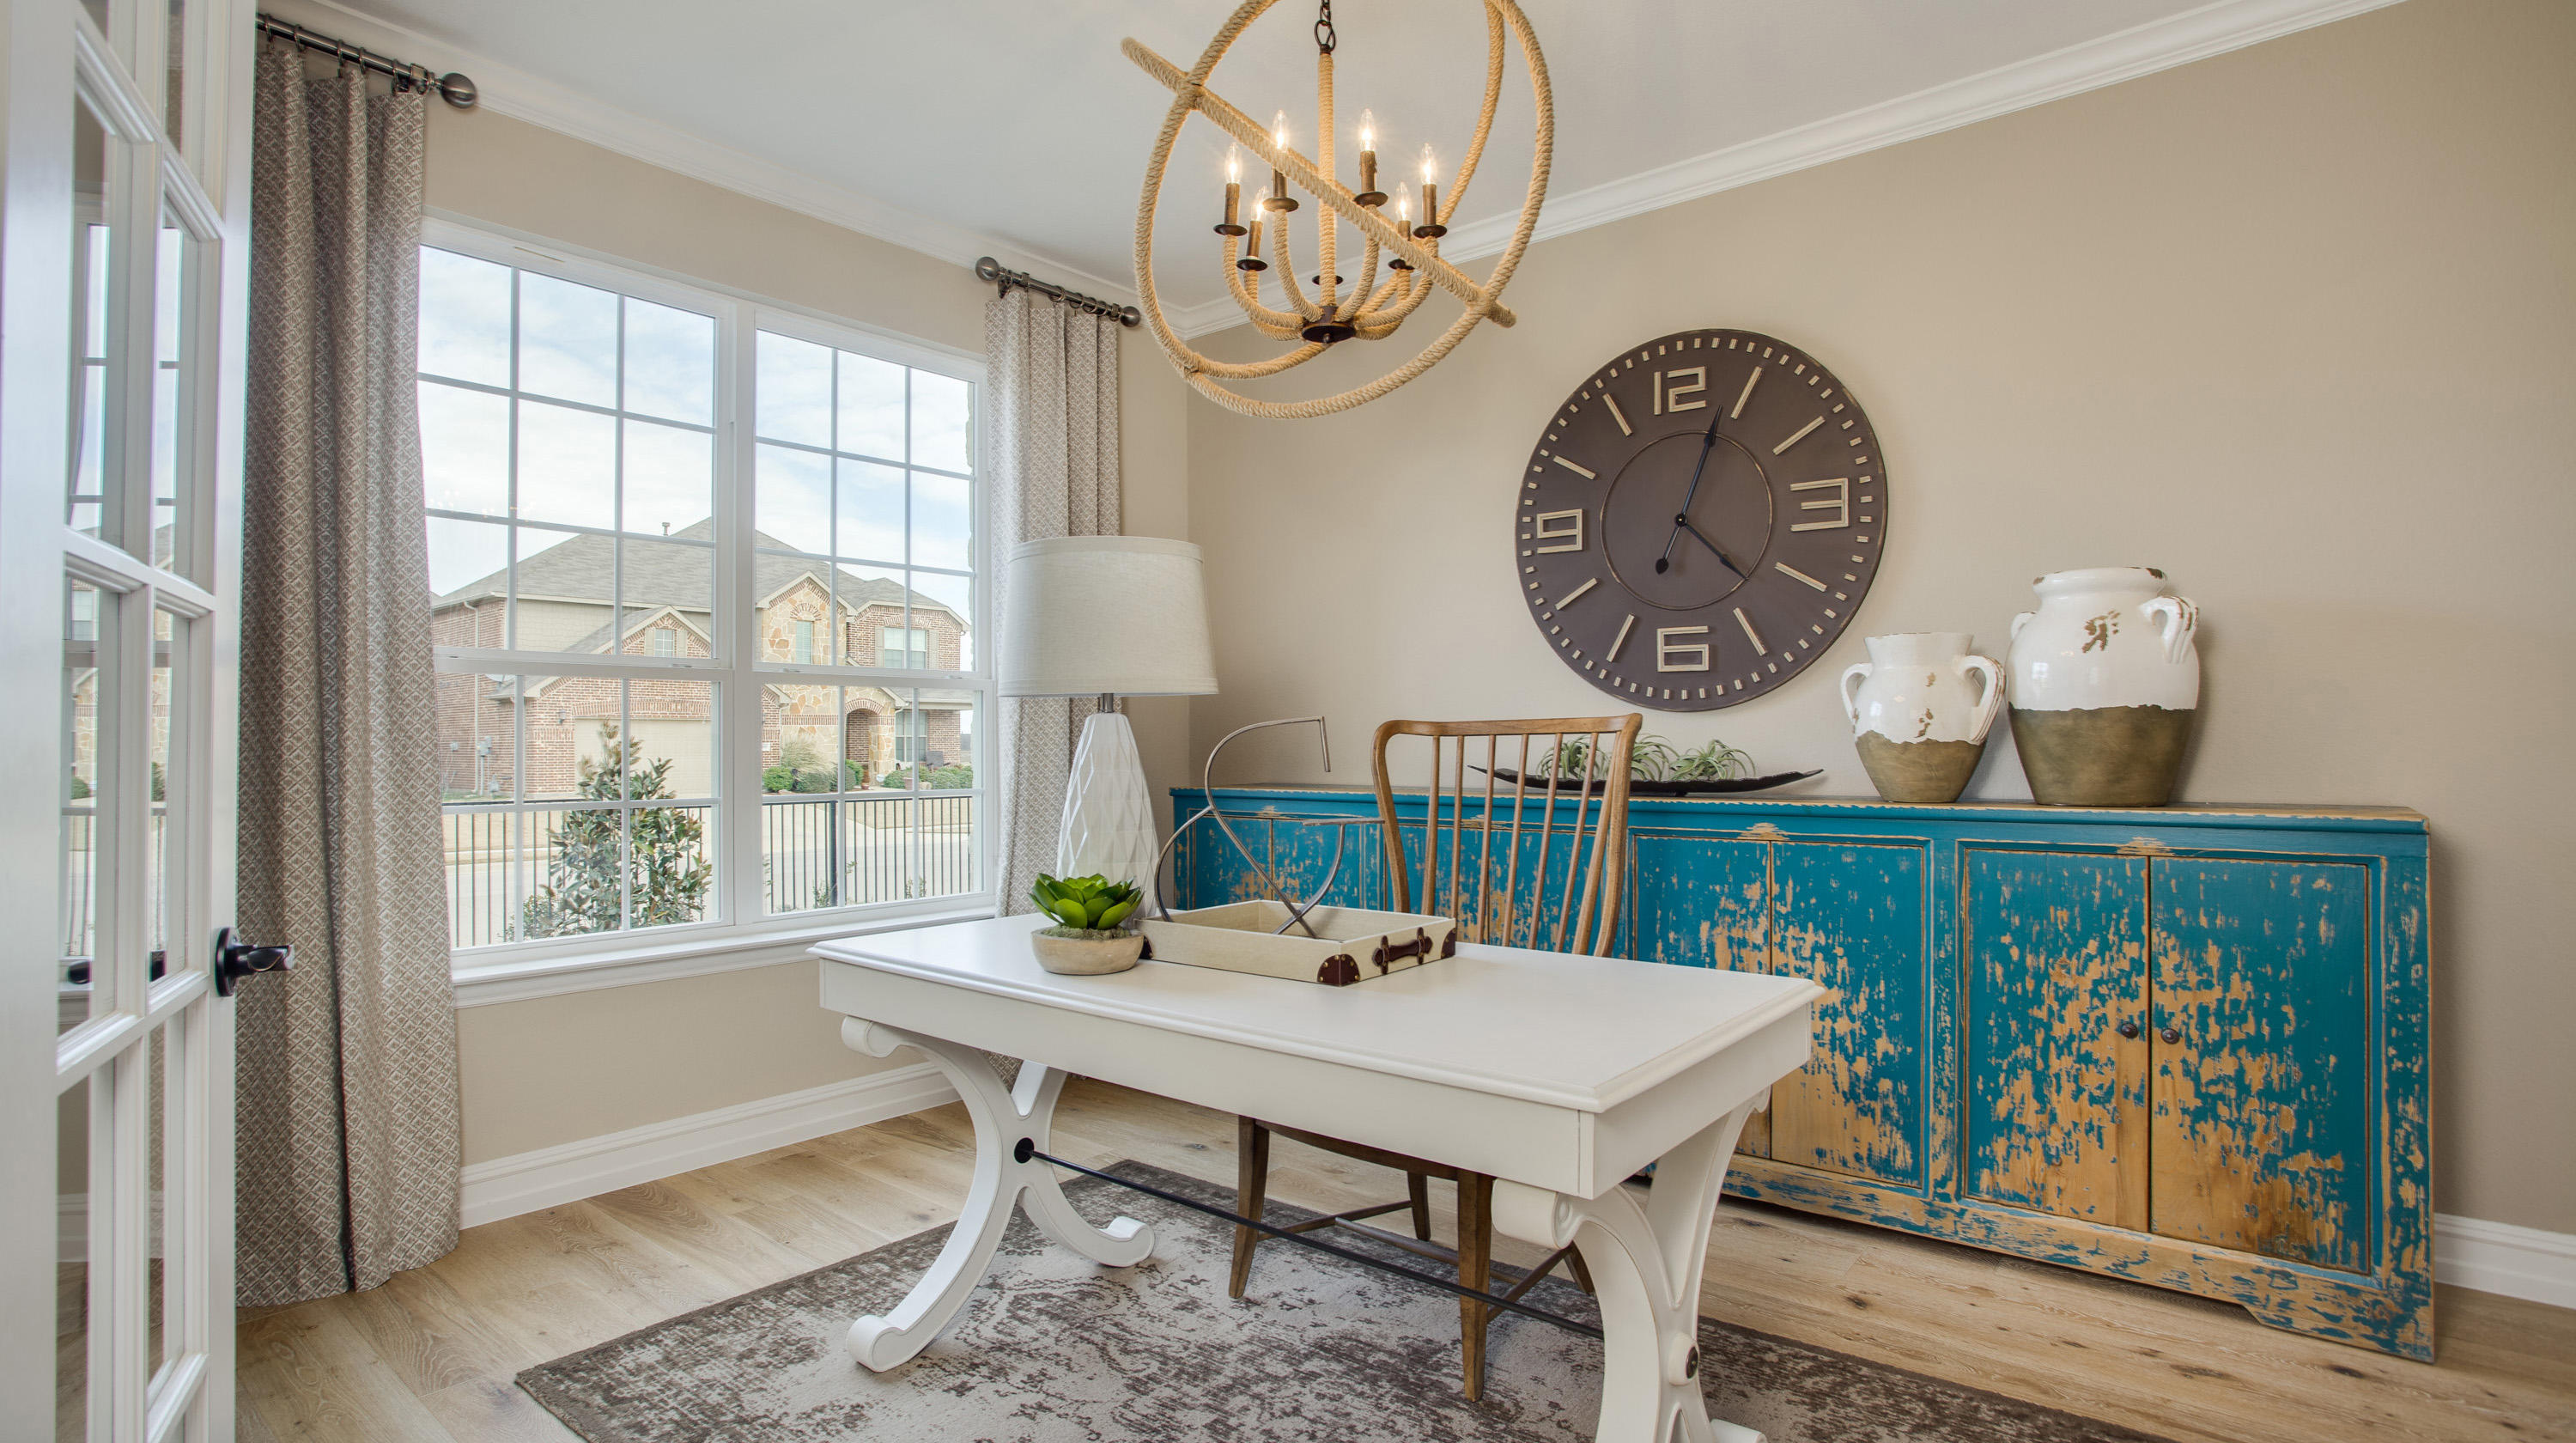 Somerset by Pulte Homes Photo